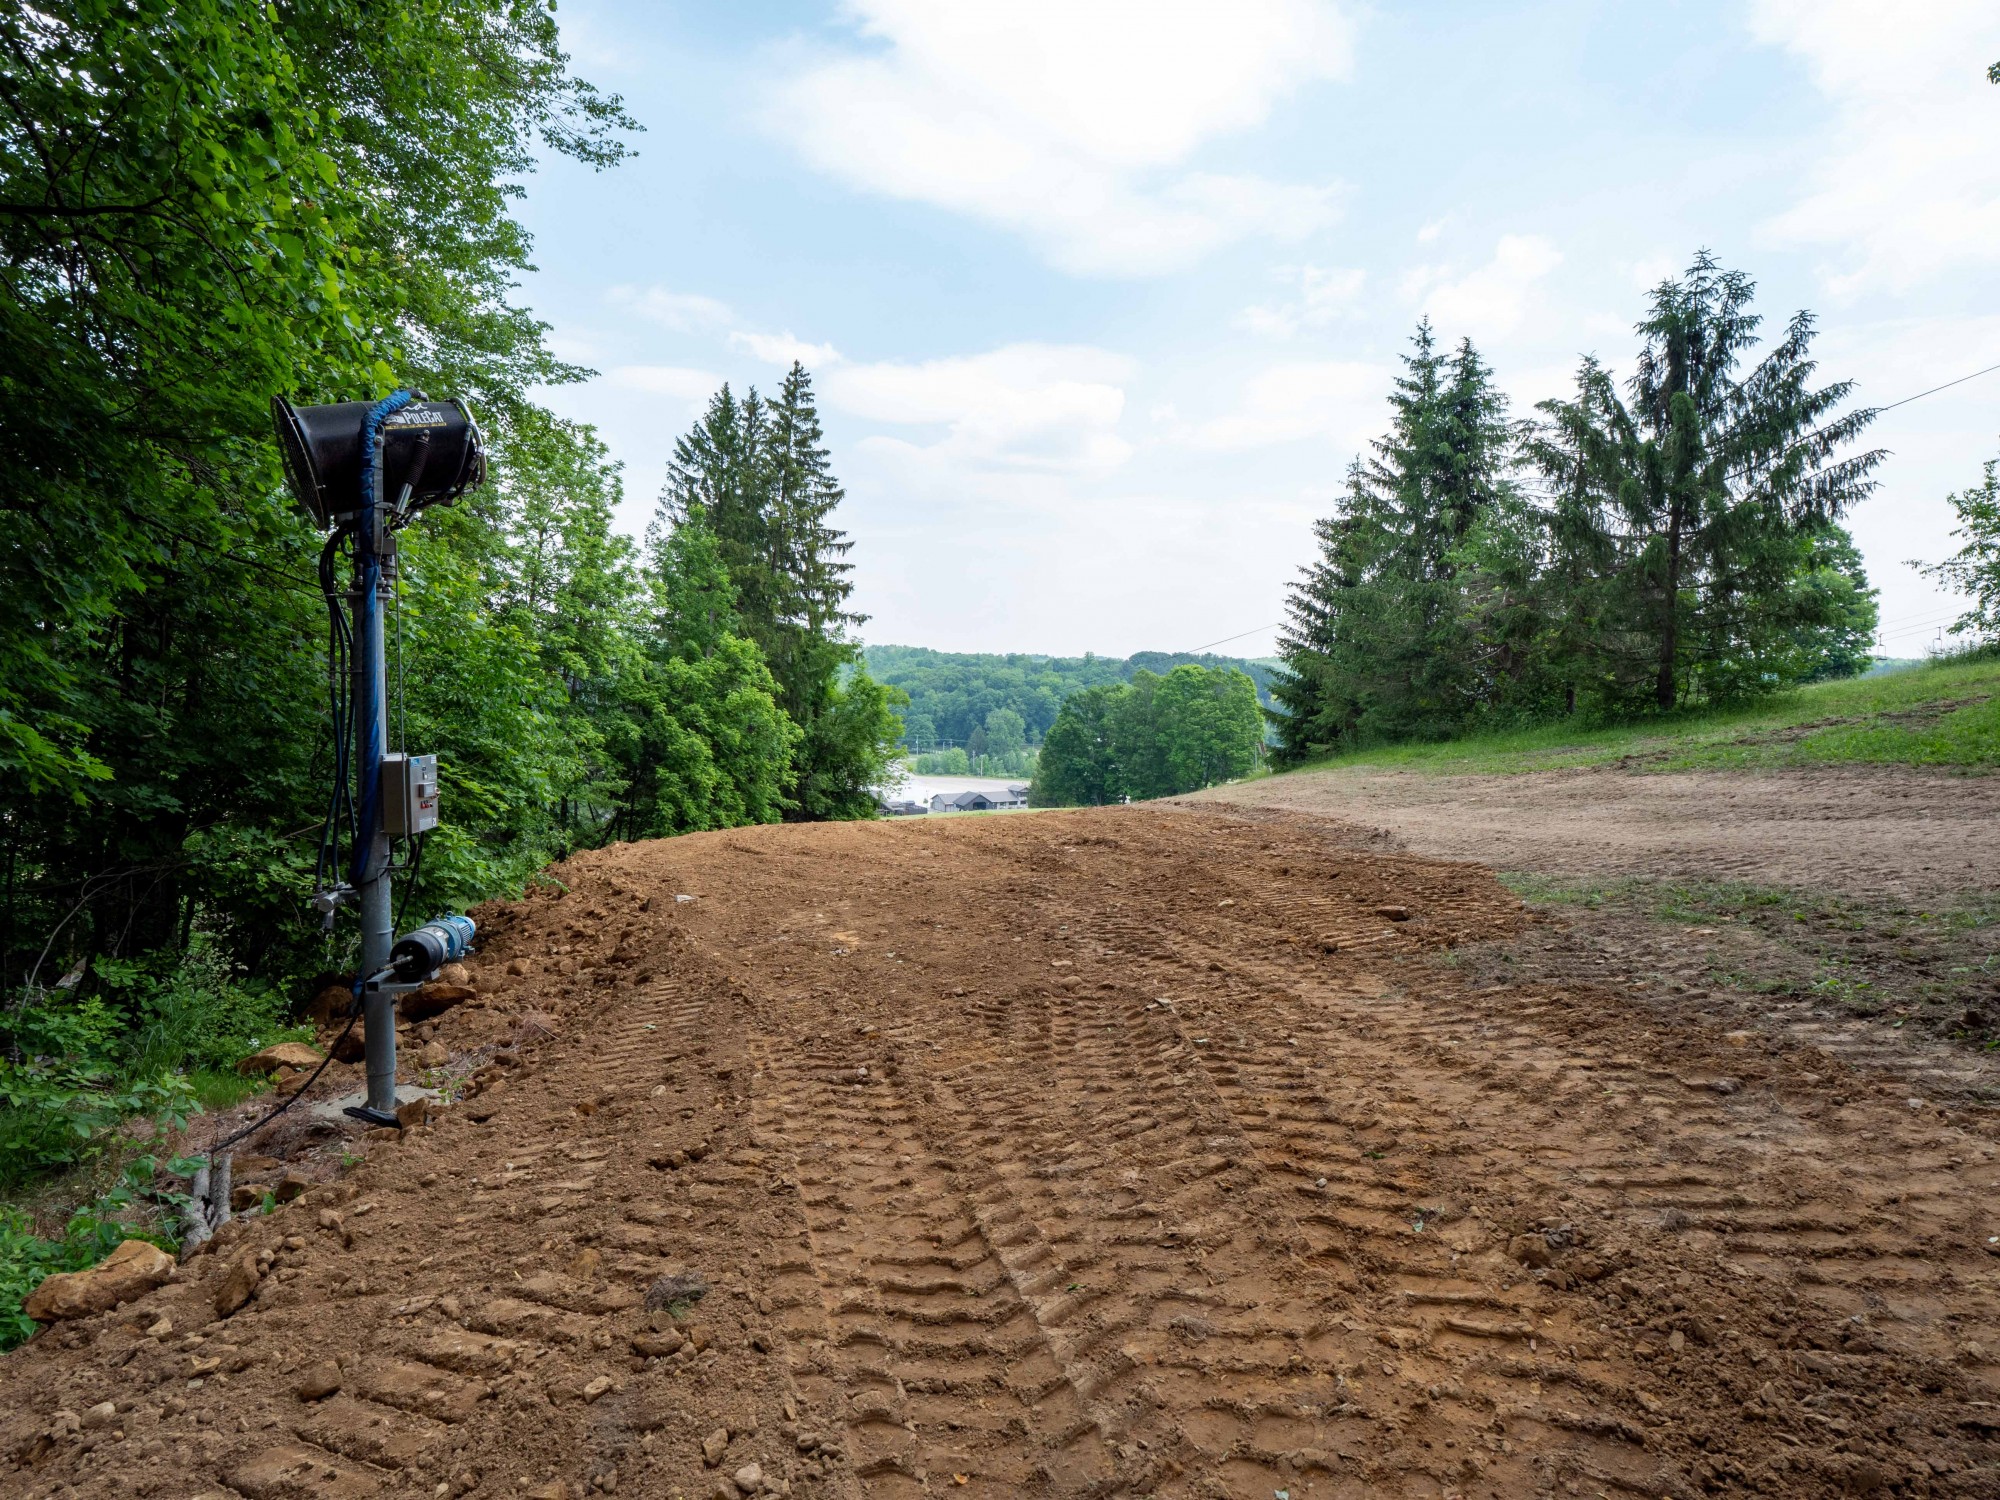 Earth Moving Improves Slope Transitions To Save On Snowmaking at Snow Trails Ohio